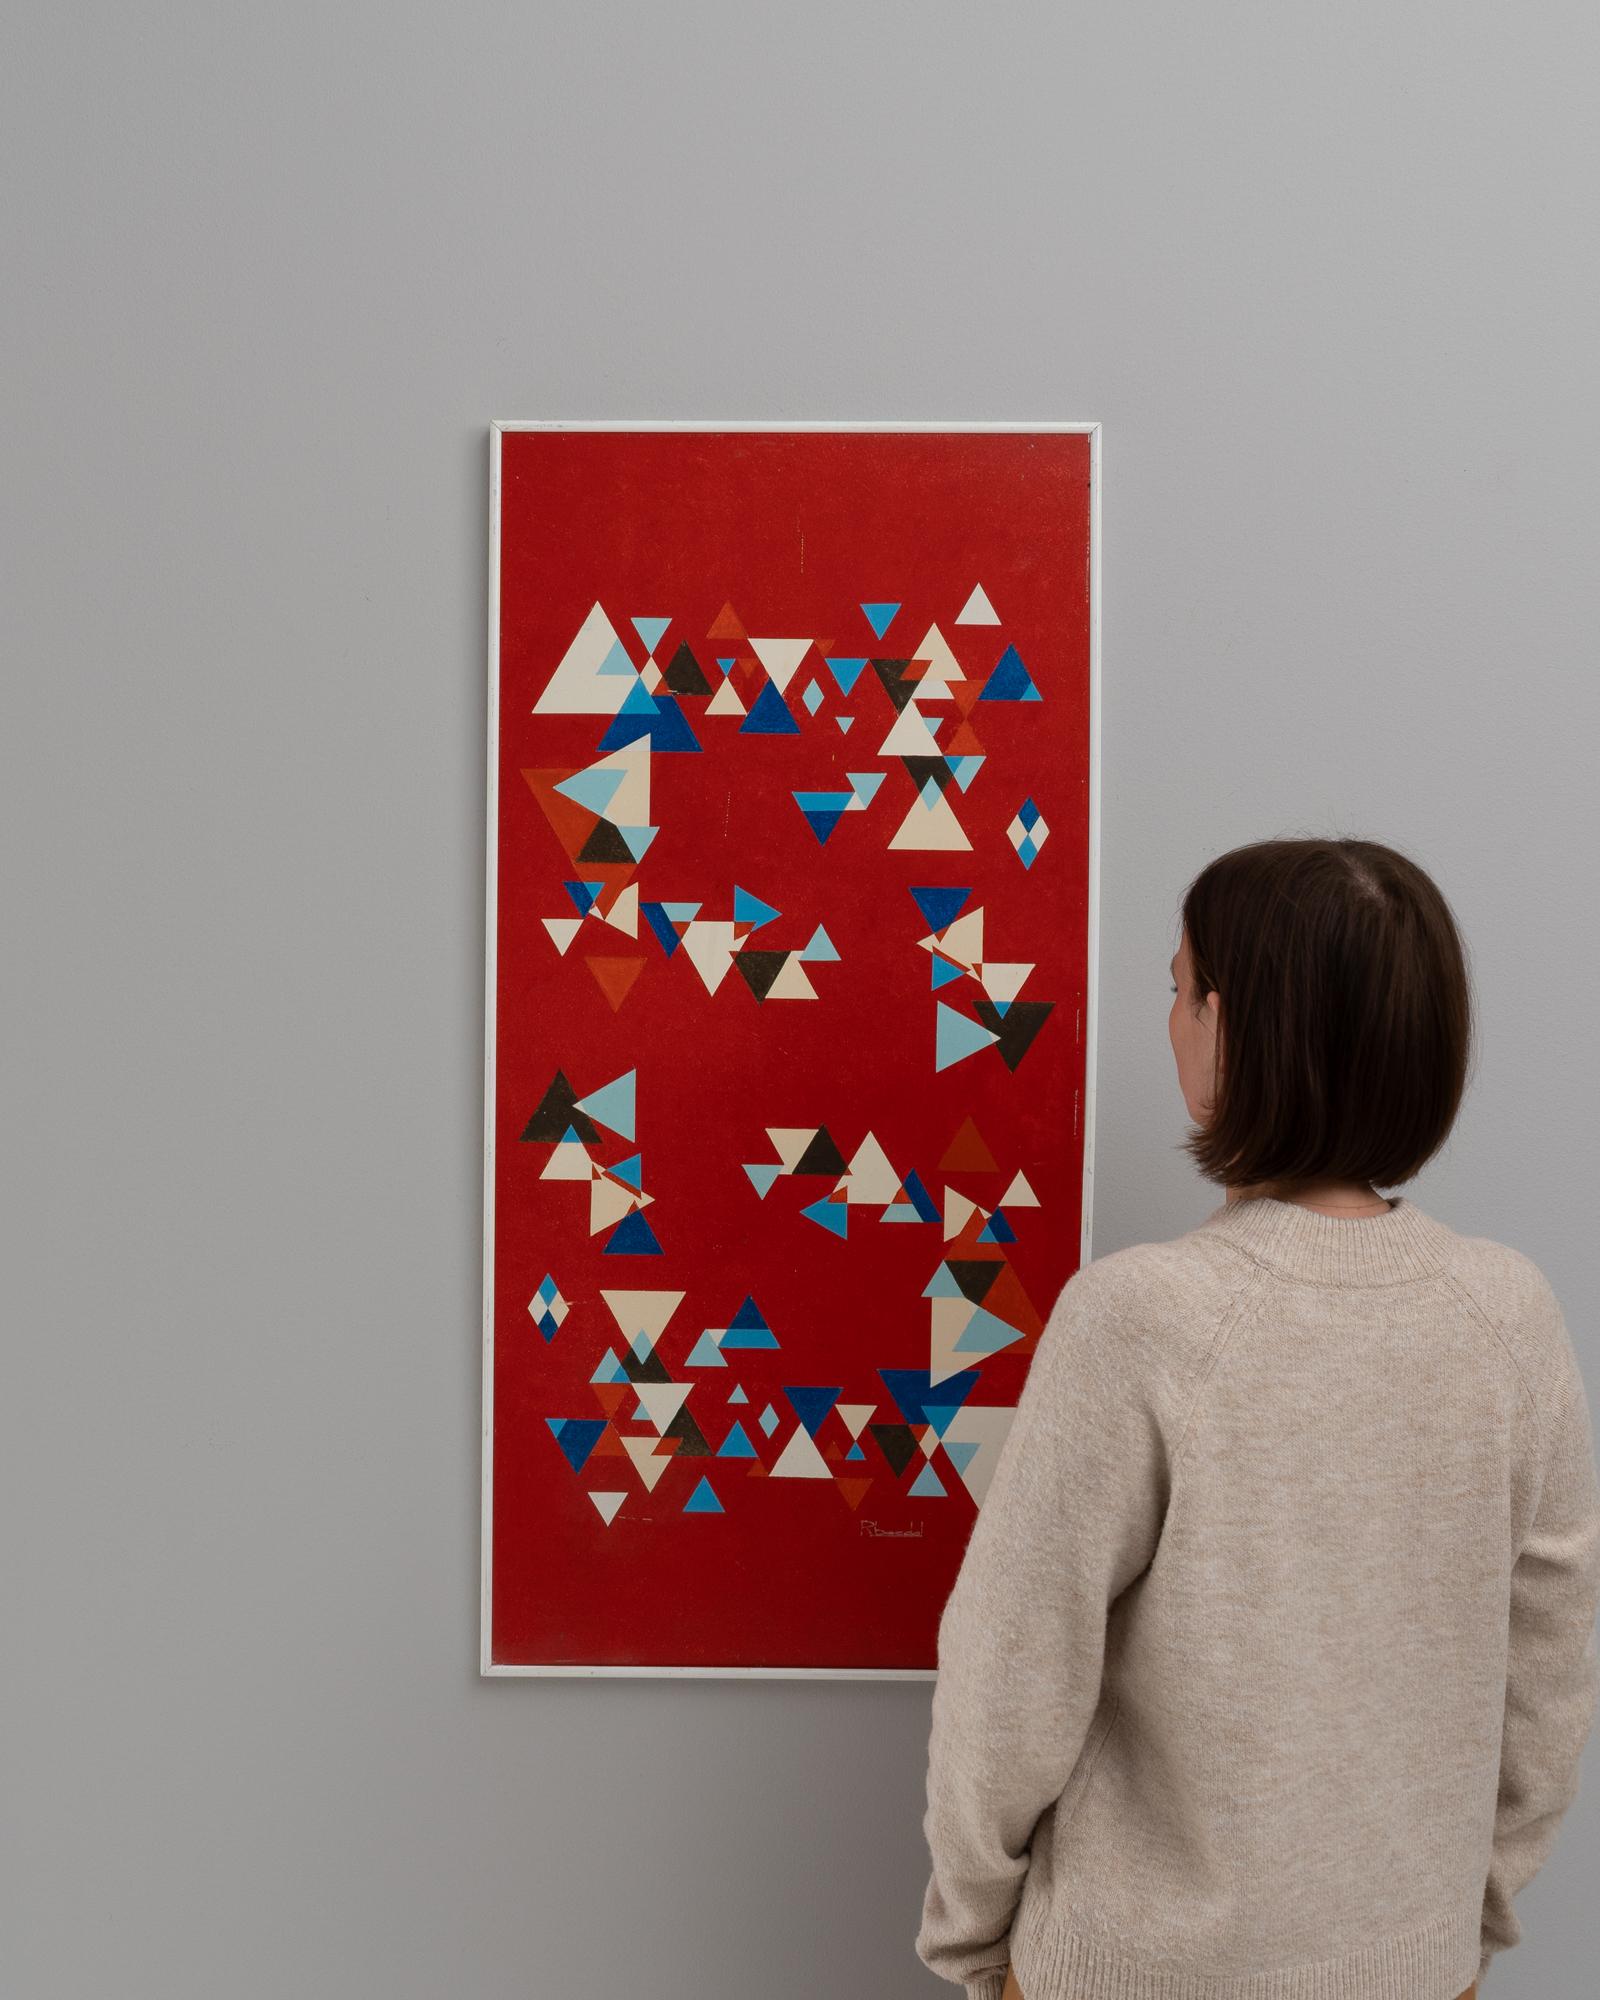 Immerse yourself in the dynamic vibrancy of this 20th Century Belgian Artwork by Rene Berdal. The piece bursts with an array of geometric shapes, each meticulously arranged to create an energetic and harmonious composition against a fiery red